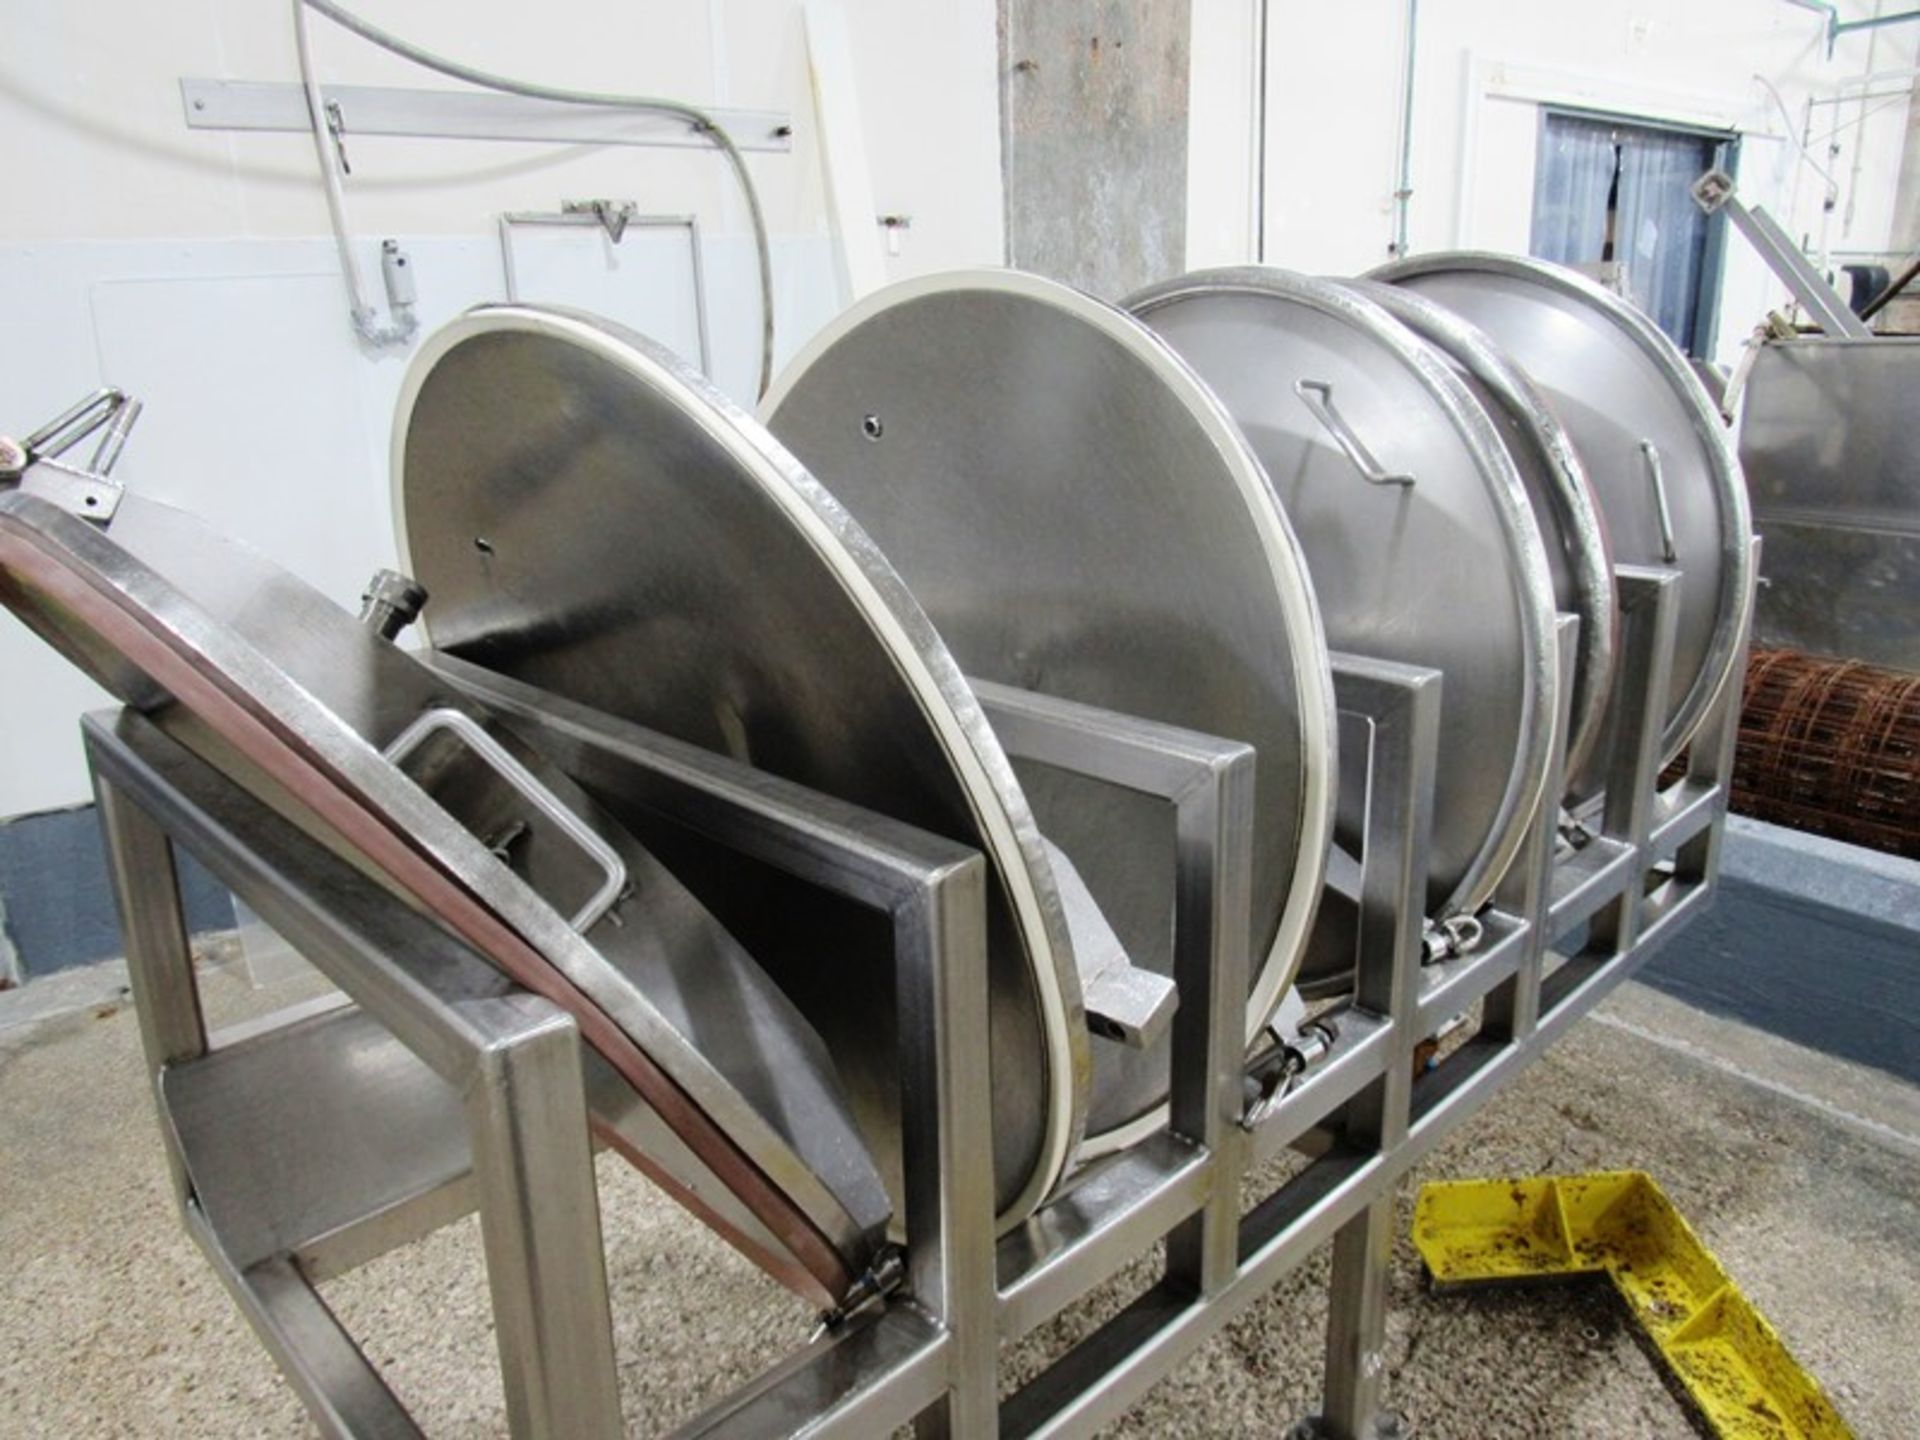 Globus Mdl. HS 3/5 Tumbling System, tumbling bed, (1) 750 liter stainless steel drum with lid, - Image 4 of 5